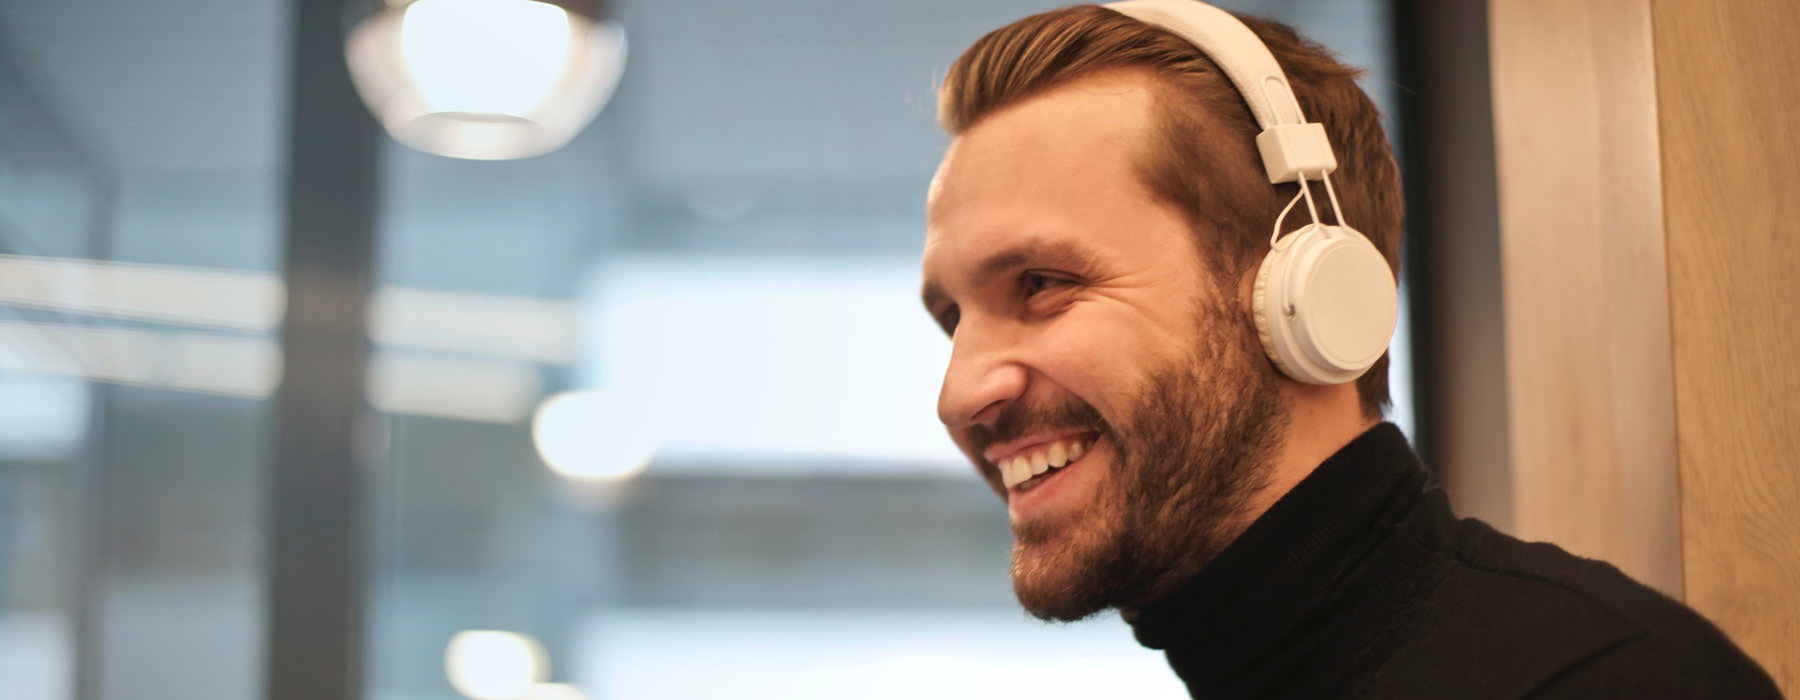 smiling, bearded man with headphones on